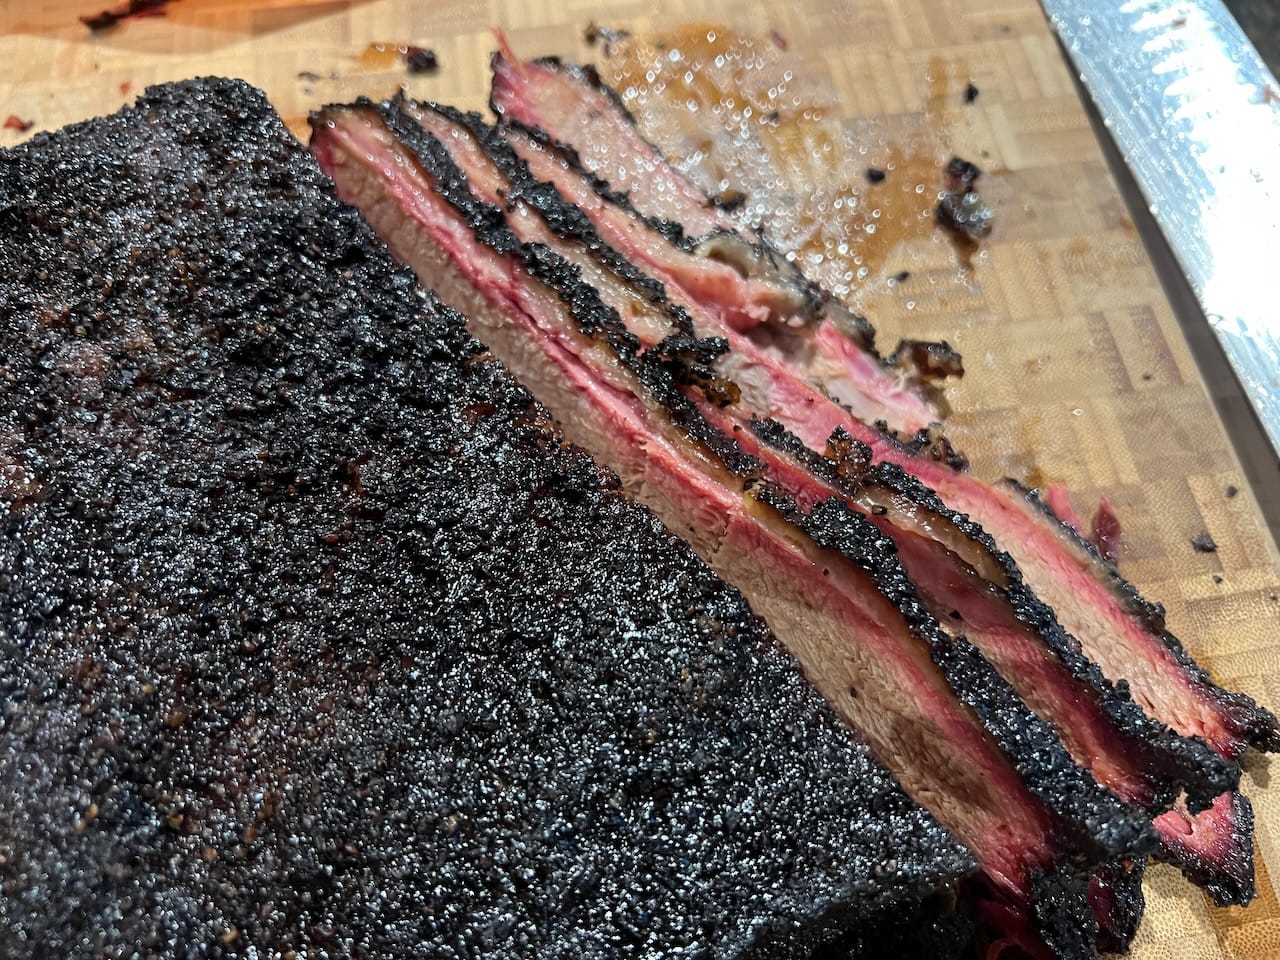 Smoke ring on brisket cooked on Mill Scale 94 offset smoker.